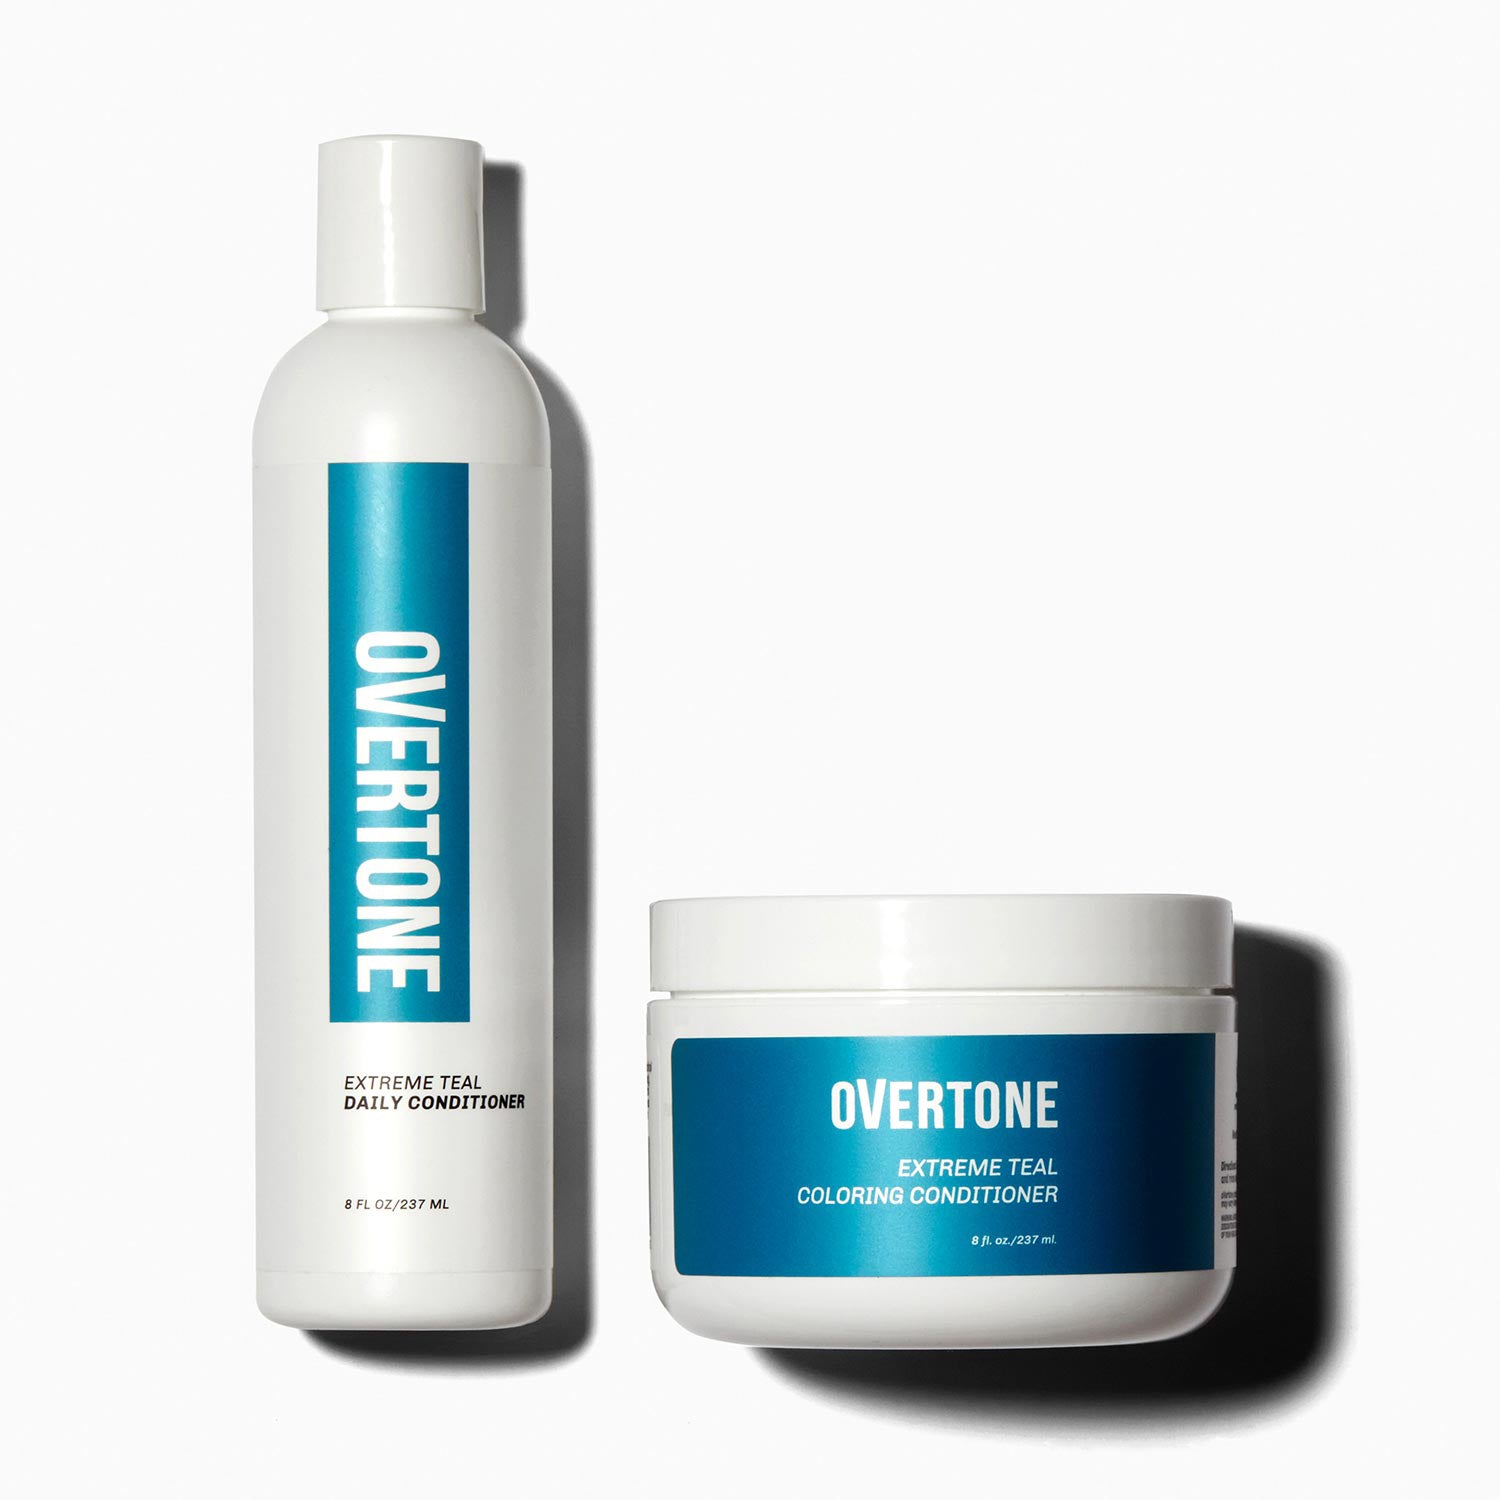 oVertone Extreme Teal Coloring Conditioner and Daily Conditioner